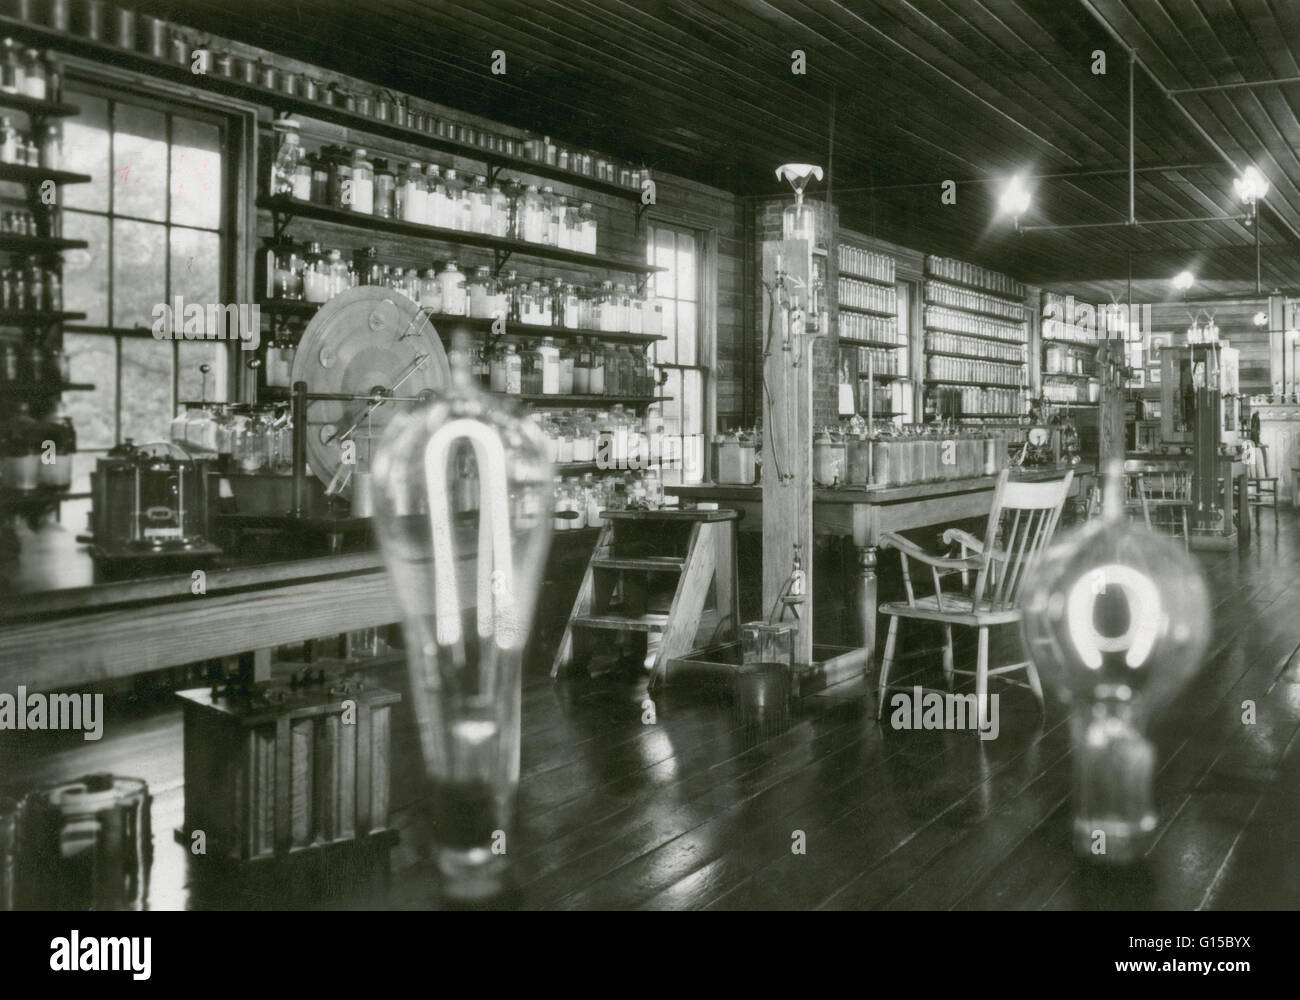 Thomas Edison's Menlo Park Laboratory in New Jersey, photographed on February 22, 1880. This was the first industrial research lab, in operation from (1876-1881). It has since been removed to Greenfield Village in Dearborn, Michigan. Thomas Alva Edison (1 Stock Photo